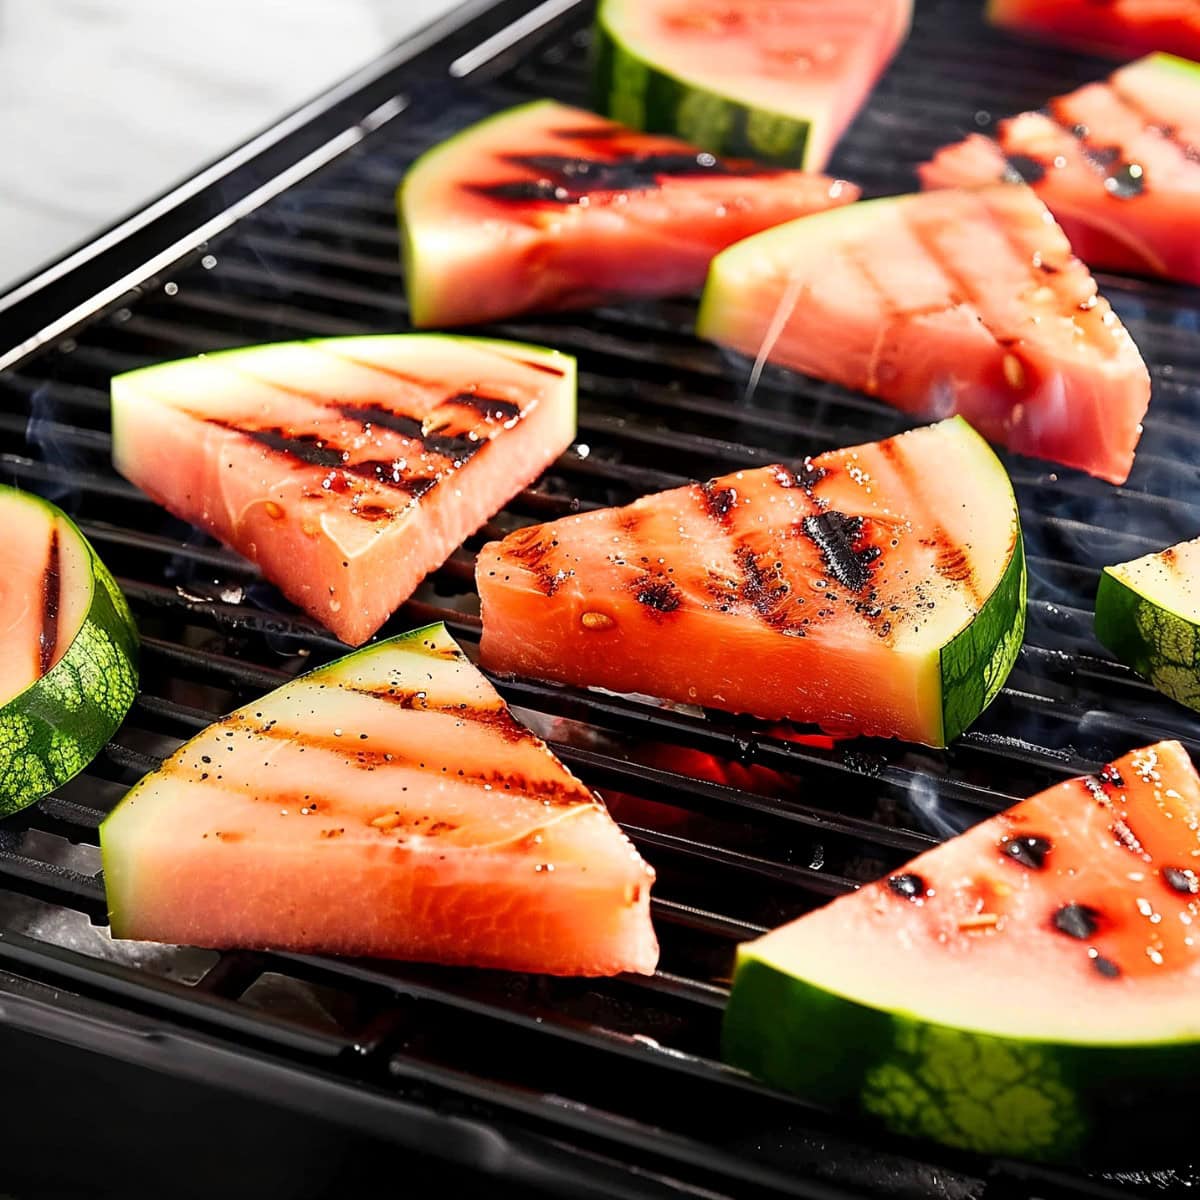 several slices of watermelon are being grilled on a grill